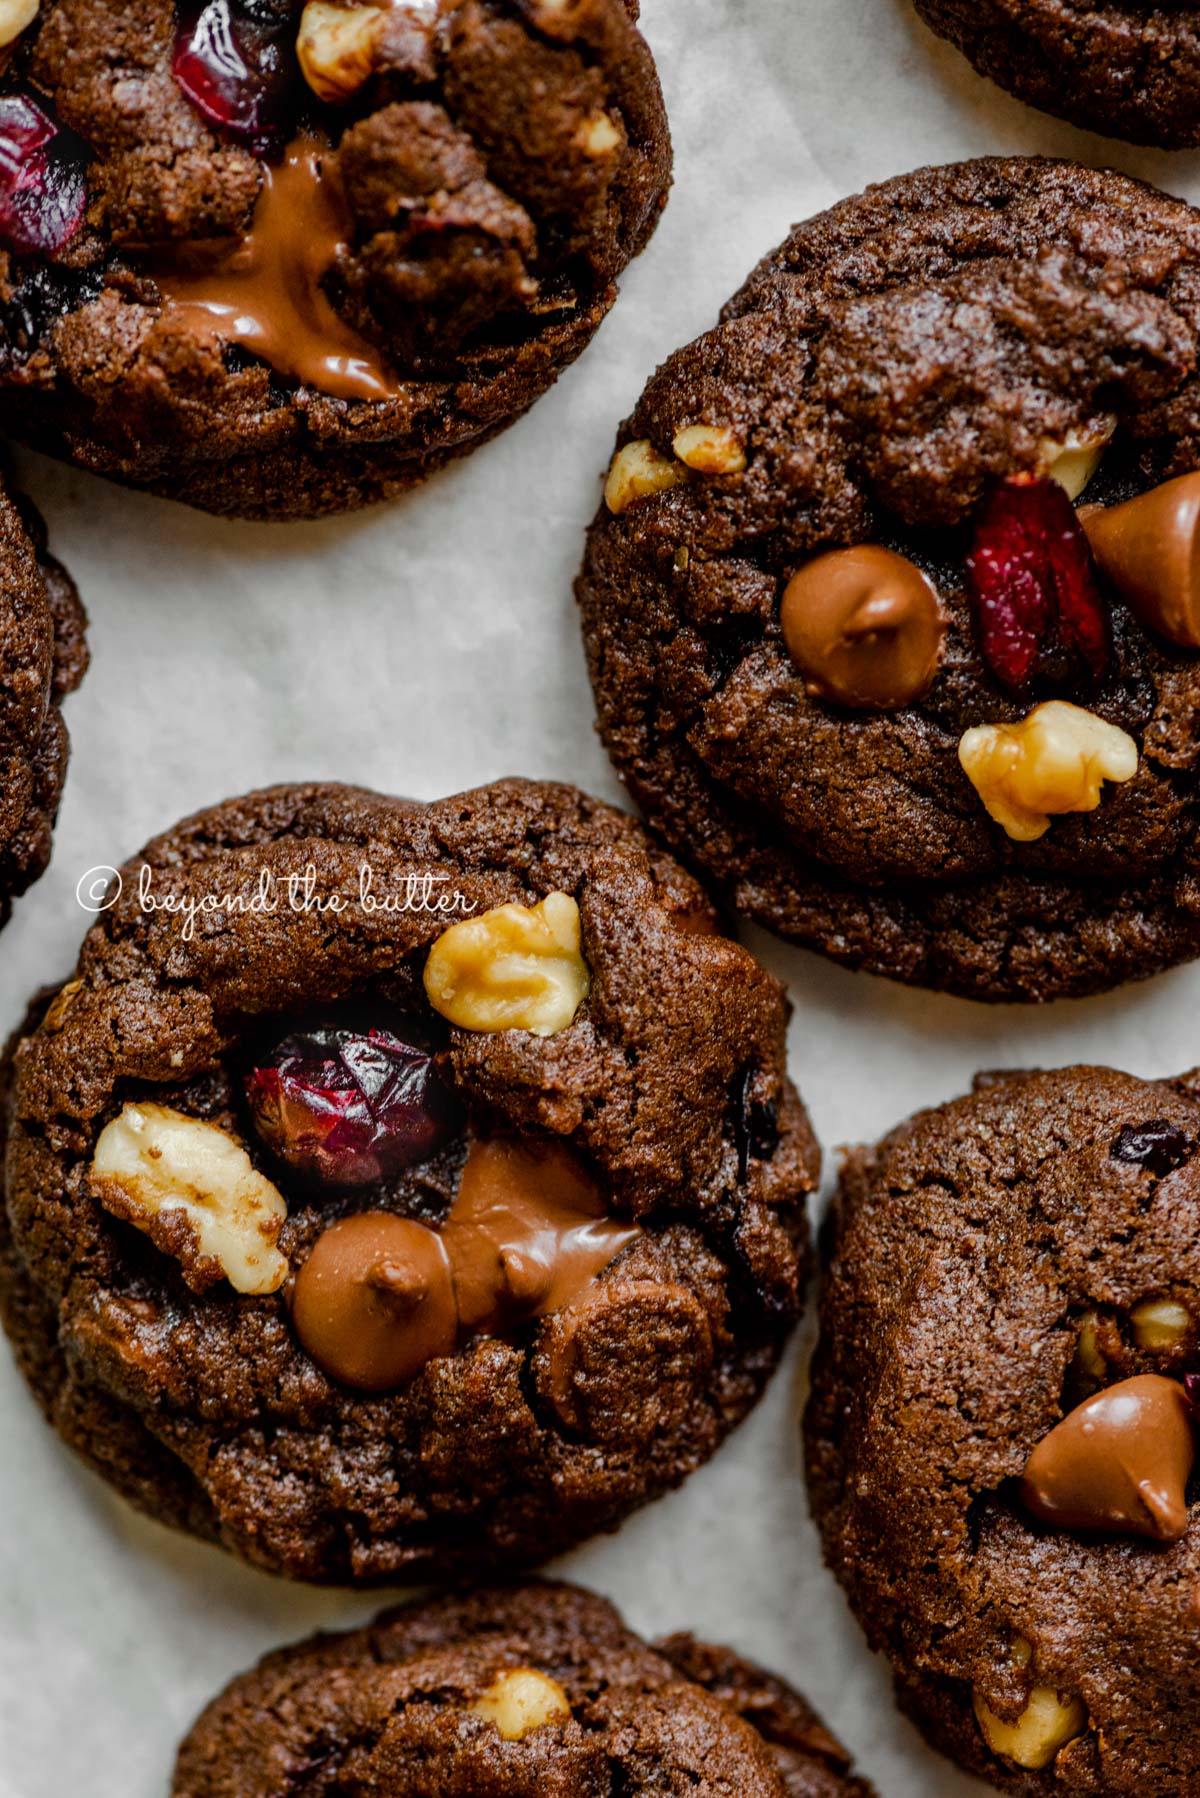 Dark chocolate cranberry walnut cookies on light gray background | All Images © Beyond the Butter®